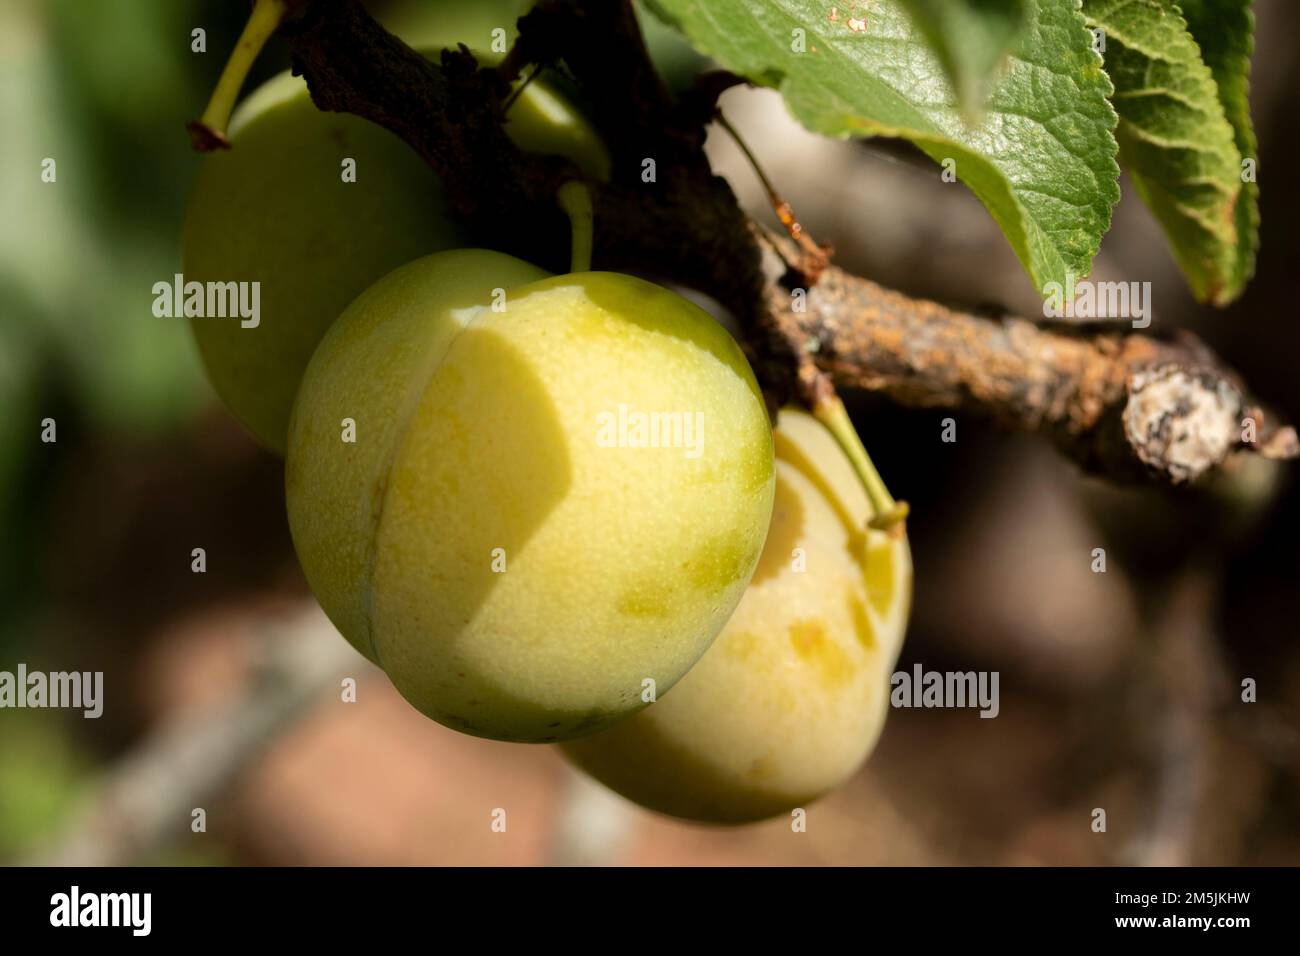 Super sweet Greengages on the tree. Natural close up fruit portrait Stock Photo